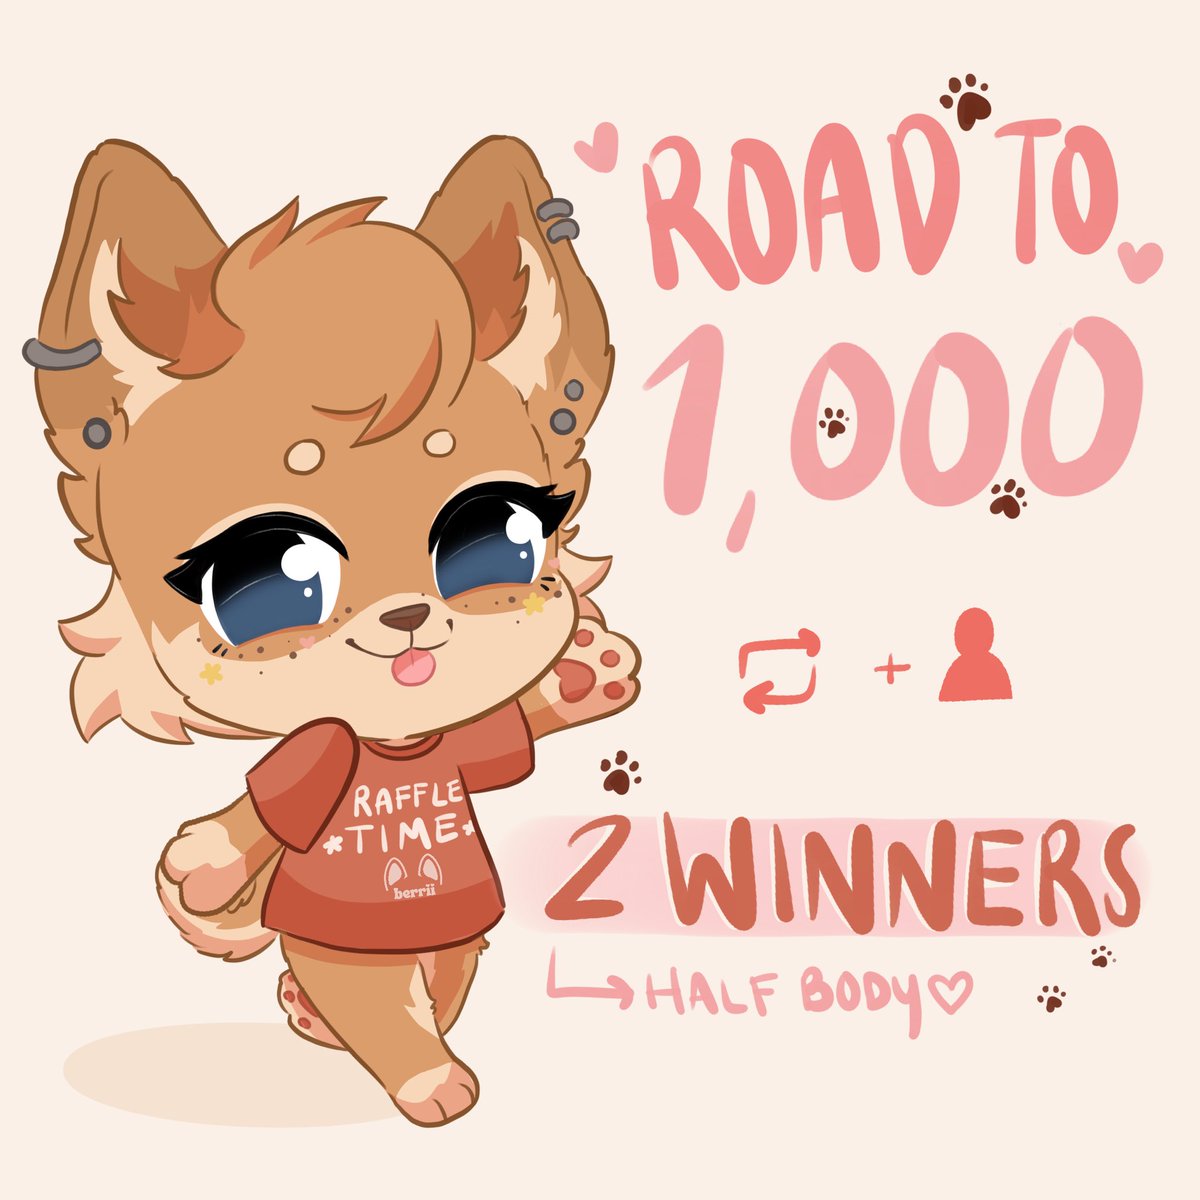 🎊 RAFFLE TIME! 🎊 👤 Follow + 🔁 Repost ✦ Ends when I reach 1k ✦ 2 Winners (Half Body Prize) 🌷 Rules 🌷 ✦ Human and anthro welcome! ✦ Must own the OC!